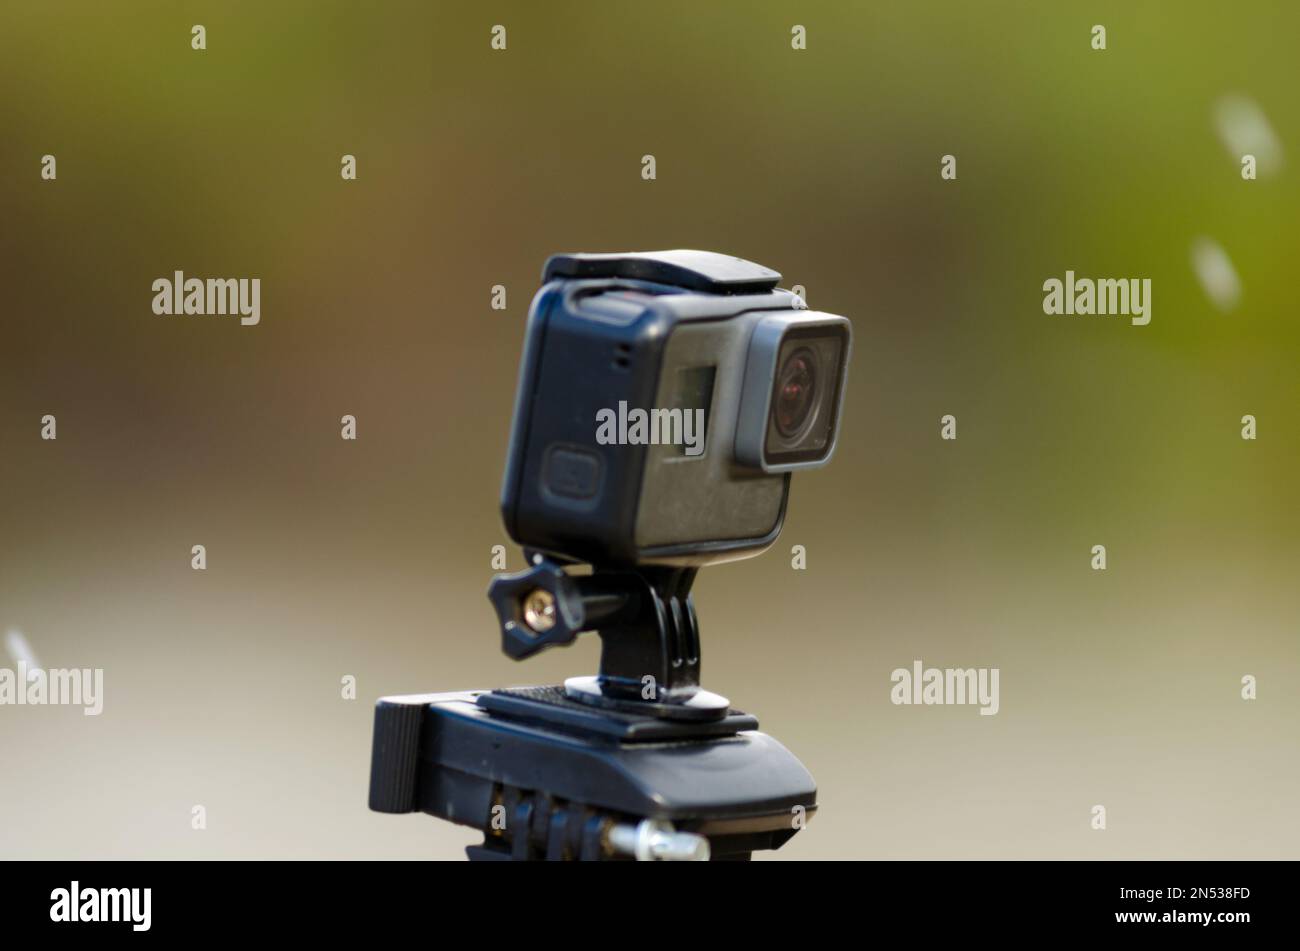 Action camera is recording video on a blurred background of snow and grass with a river. Stock Photo